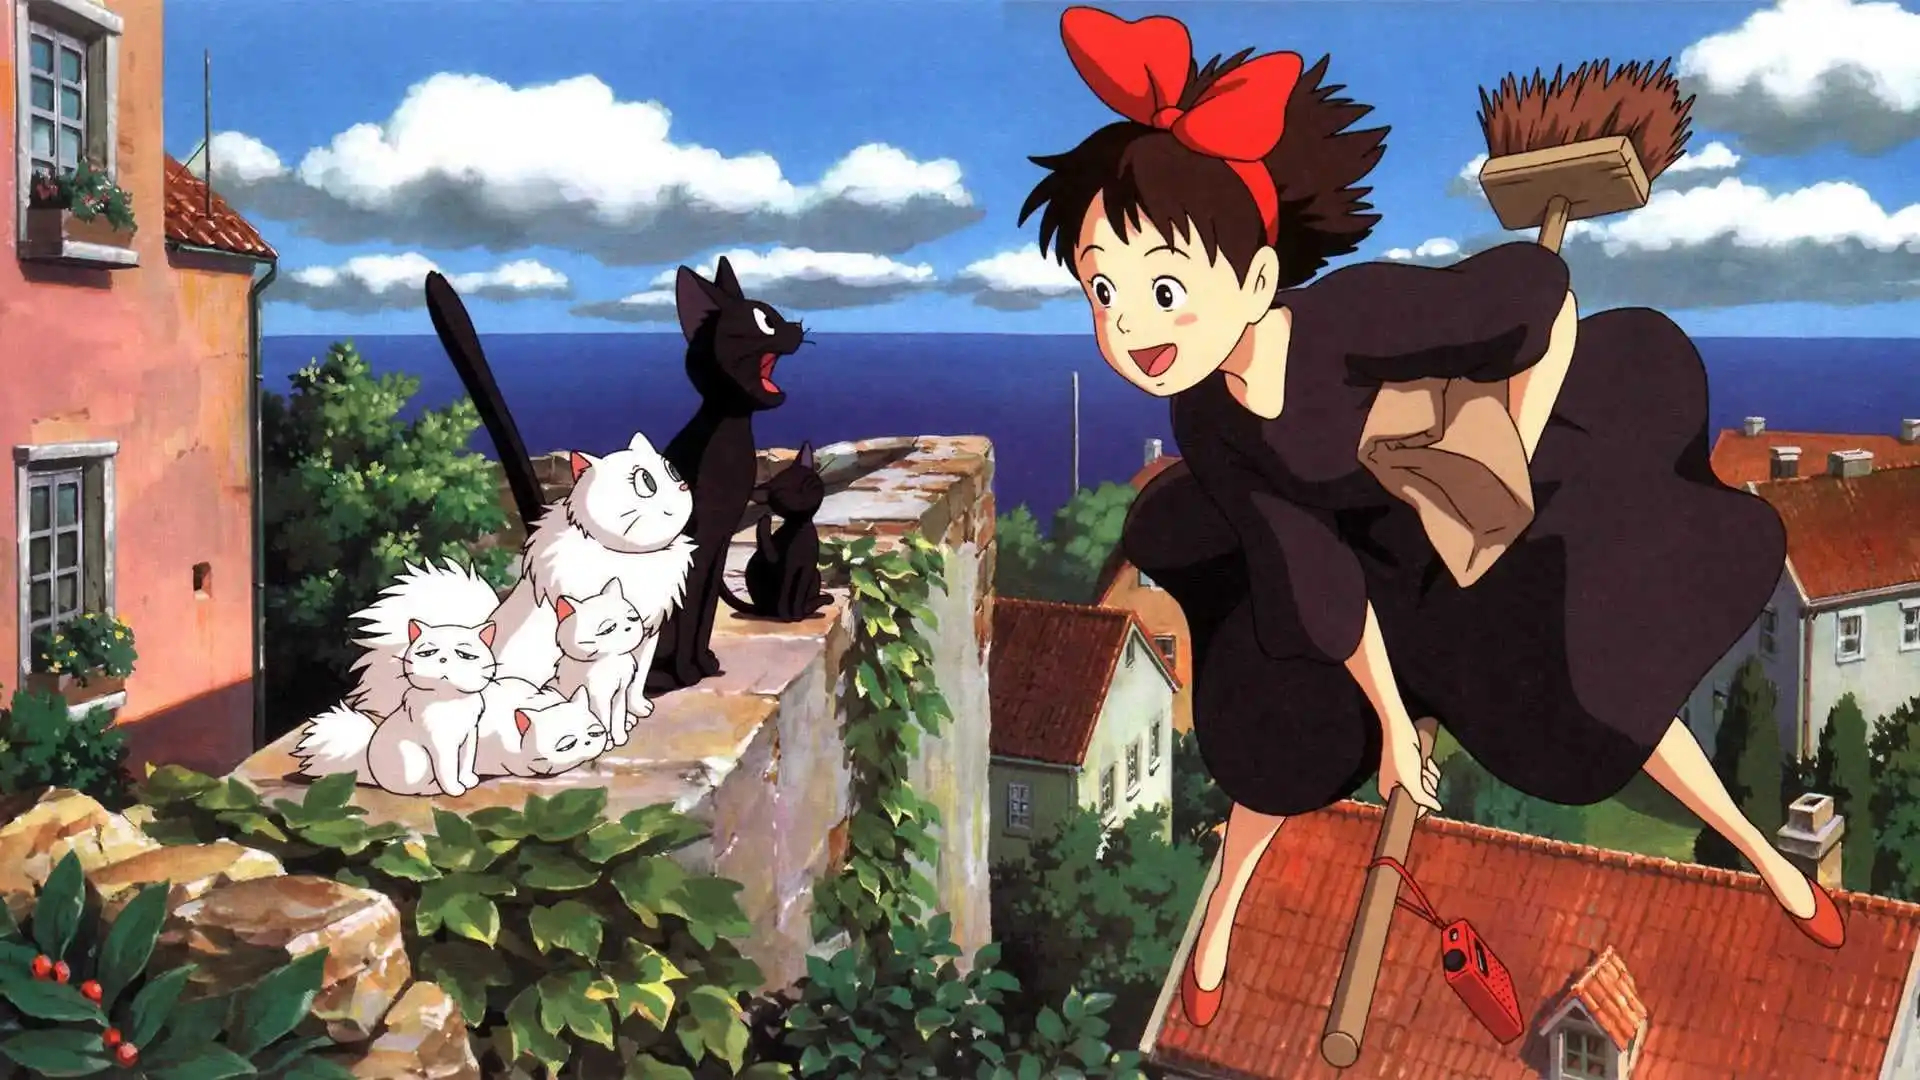 1920x1080 Studio Ghibli films just became available to rent on major digital platforms Apple TV, Amazon and more | TechCrunch